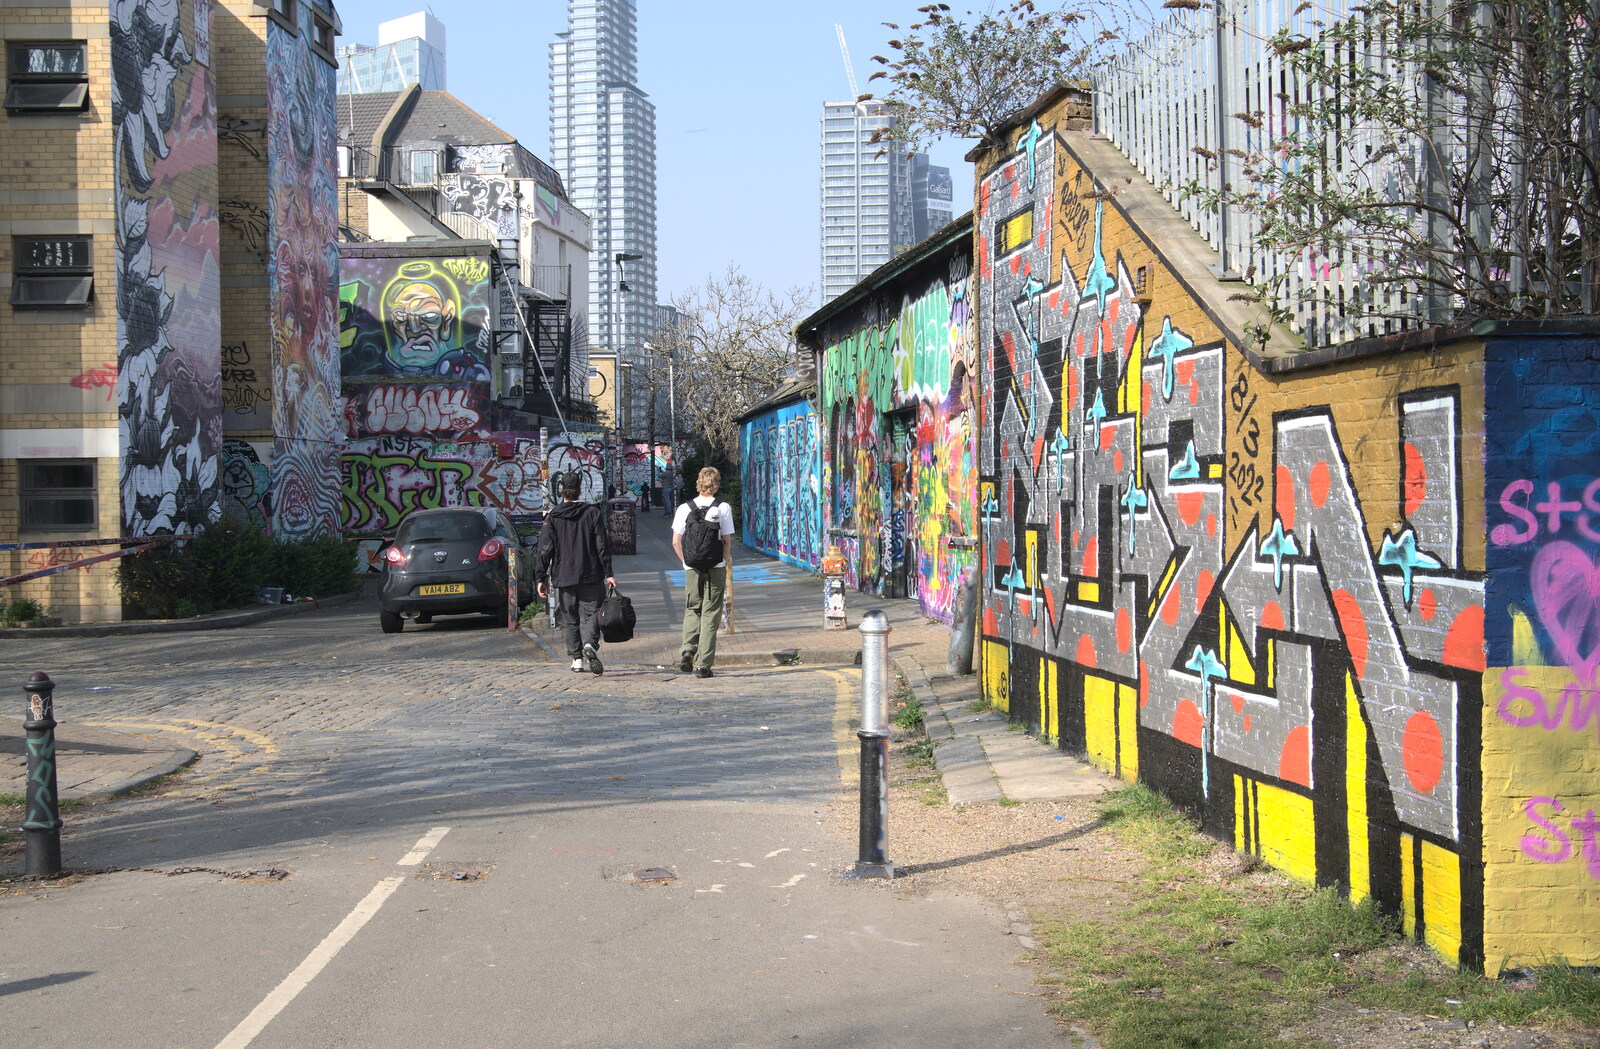 A Walk Around the South Bank, London - 25th March 2022: The path back to Brick Lane